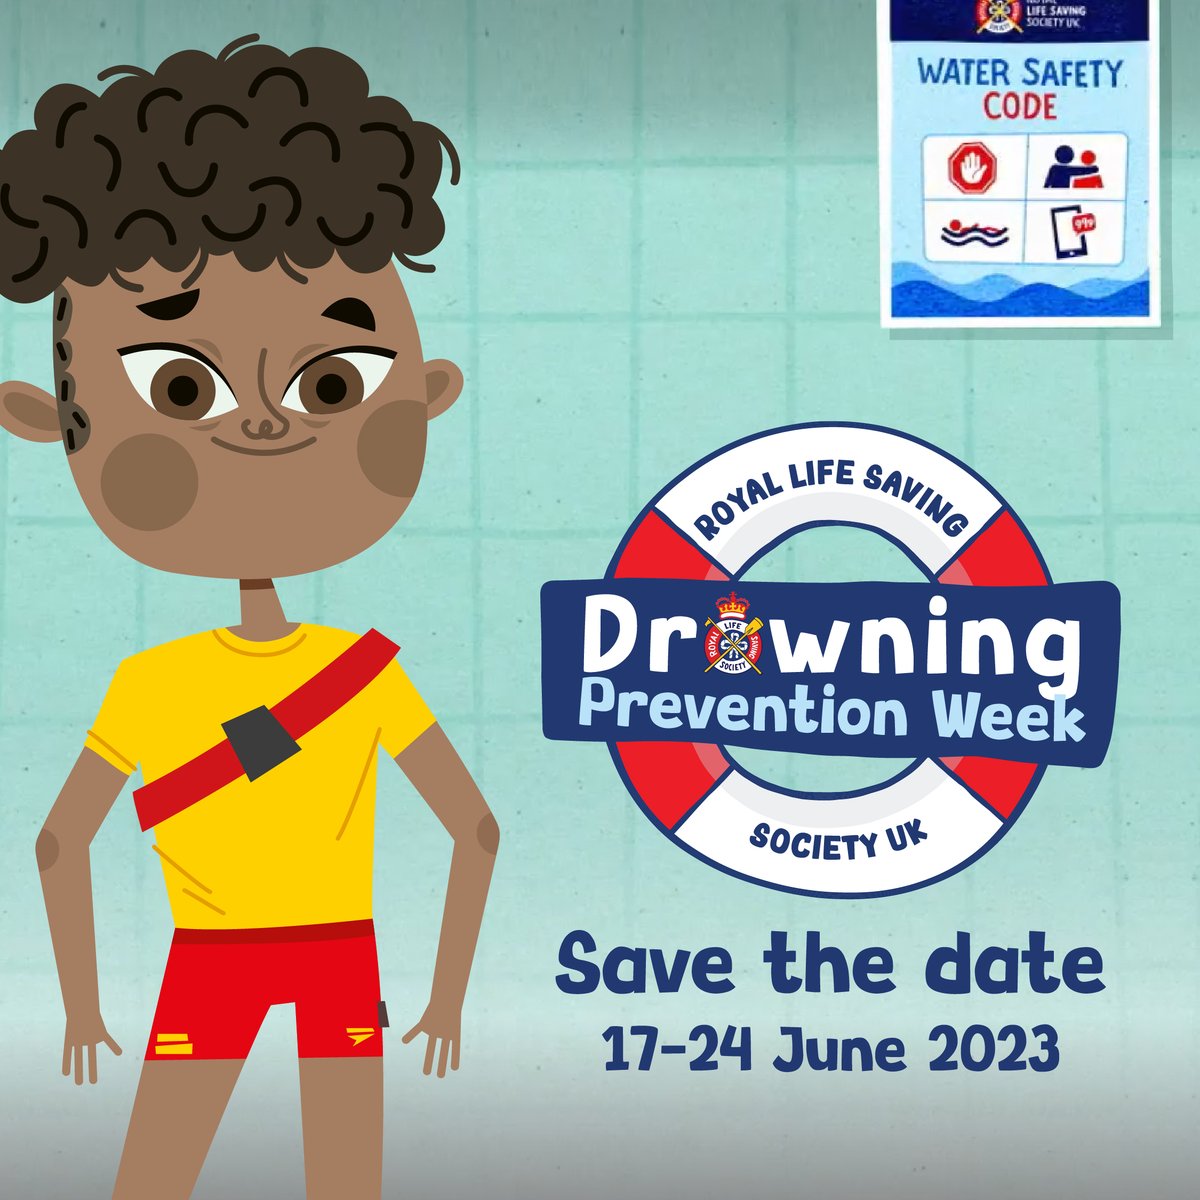 We are proud to be supporting the Royal Life Saving Society UK’s Drowning Prevention Week! 🏊

📅 When: 17-24 June 2023

To find out more, visit 👉 rlss.org.uk/DPW

#EnjoyWaterSafely #DrowningPreventionWeek